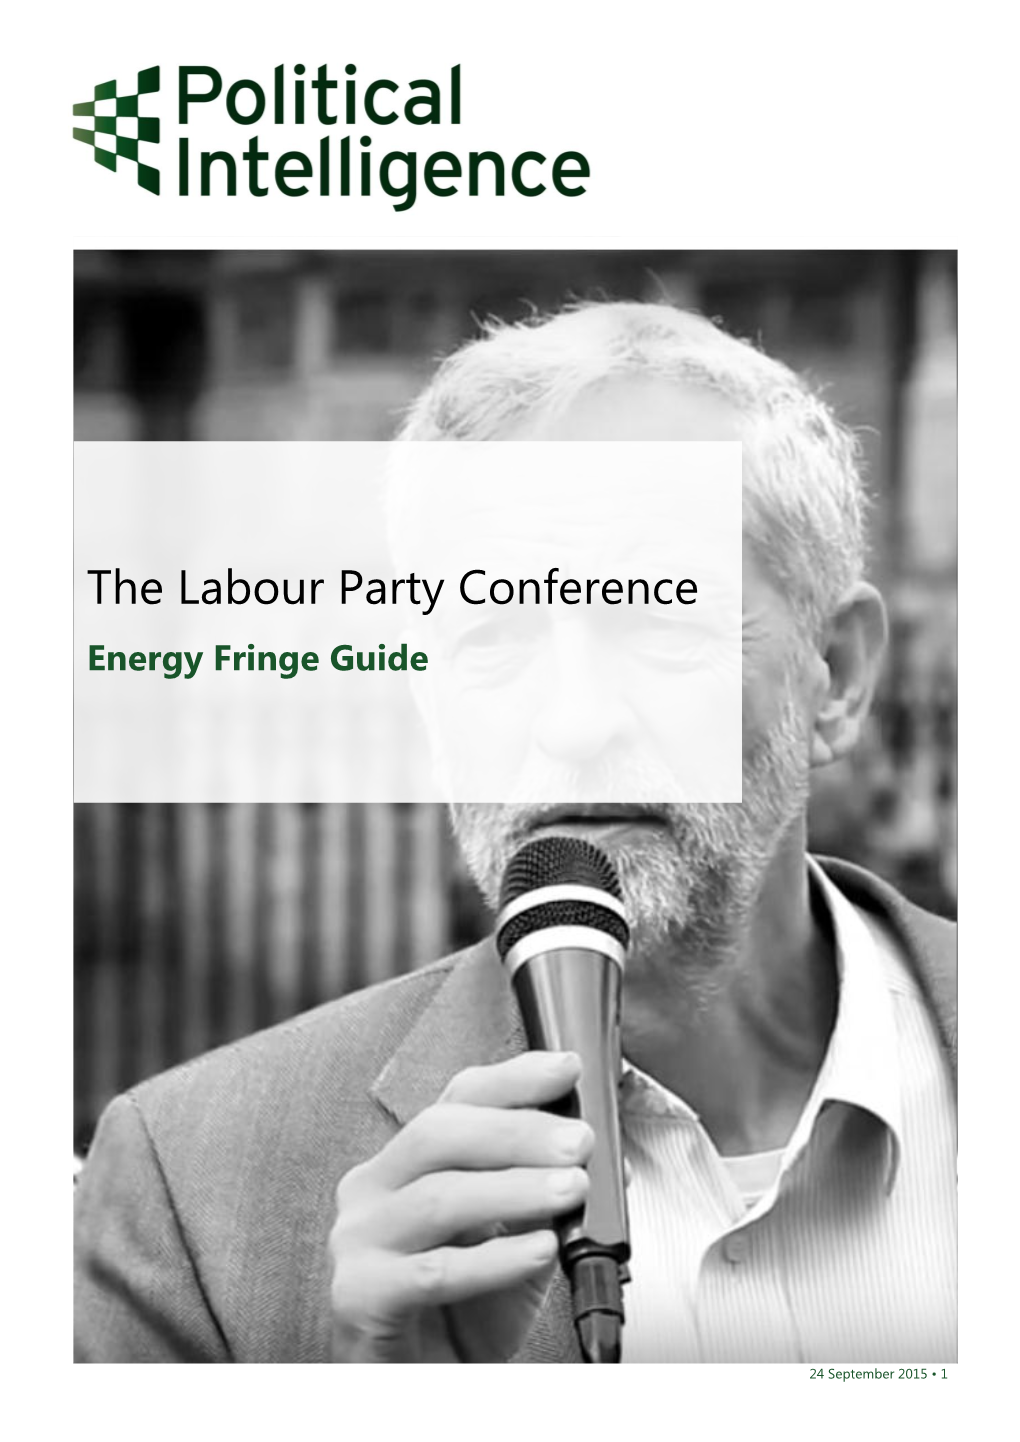 The Labour Party Conference Energy Fringe Guide